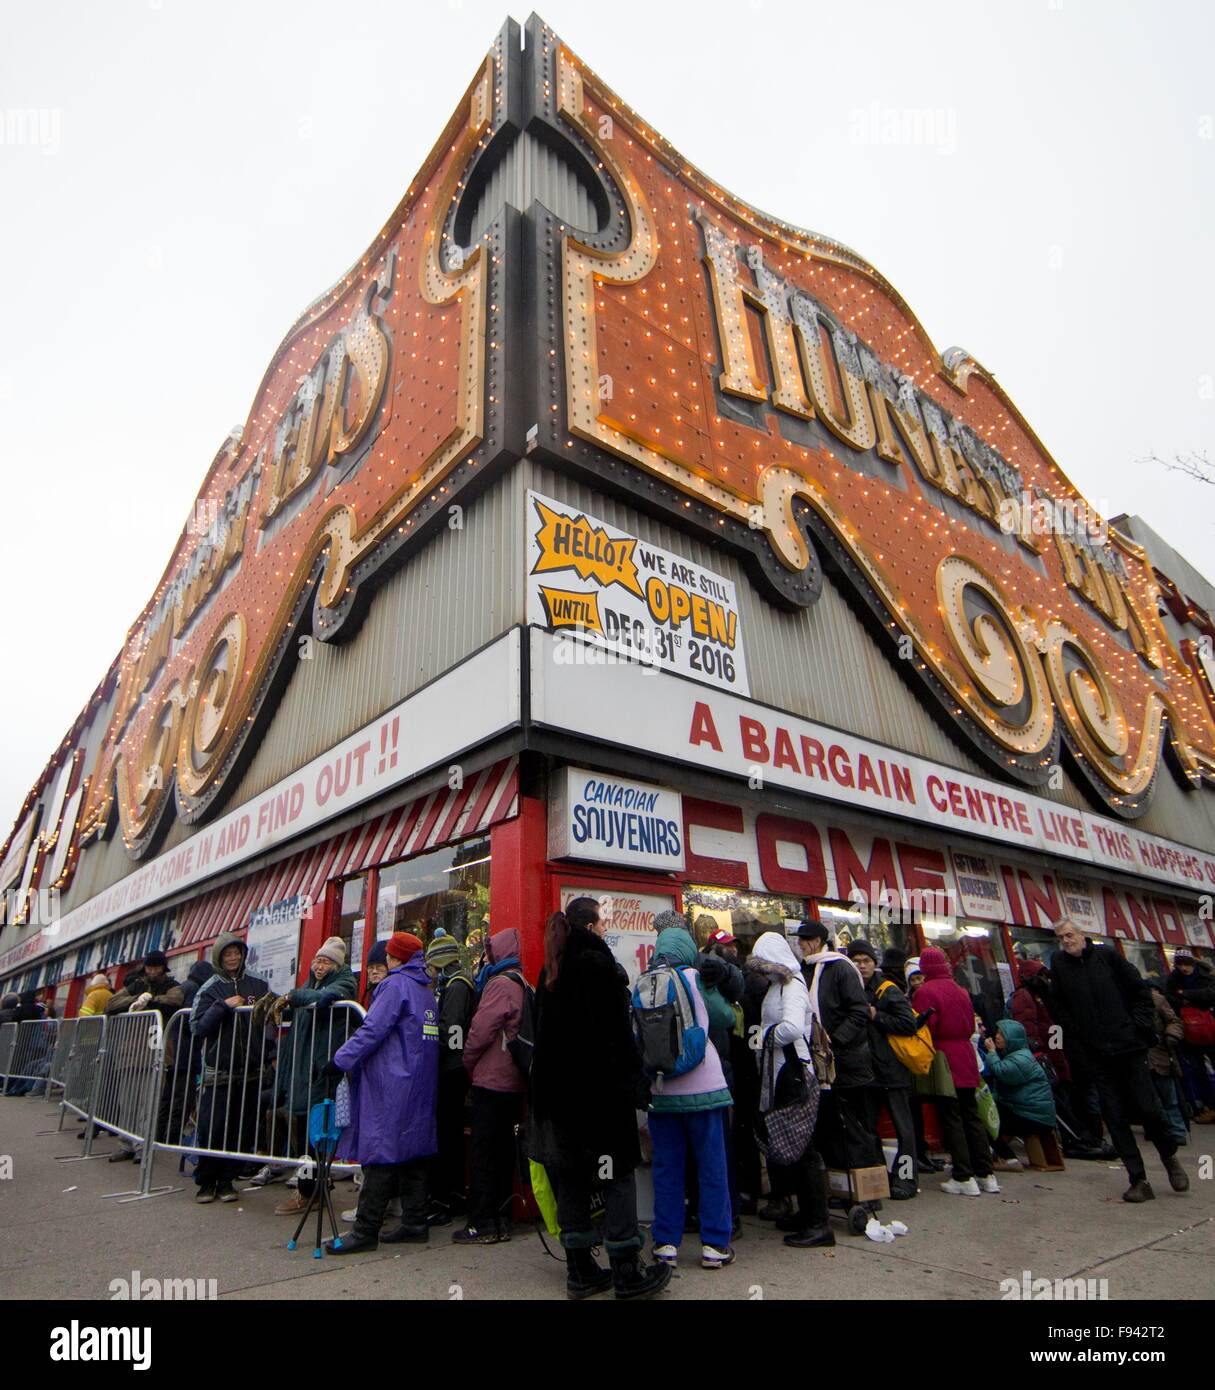 Toronto, Canada. 13th Dec, 2015. People line up for free turkeys at a local store called Honest Ed's during the store's 28th annual Christmas time turkey giveaway event in Toronto, Canada, Dec. 13, 2015. In the last giveaway of this annual event, hundreds of people around the city lined up to get one of about 1,300 free turkeys and fruitcakes from the store on Sunday. © Zou Zheng/Xinhua/Alamy Live News Stock Photo